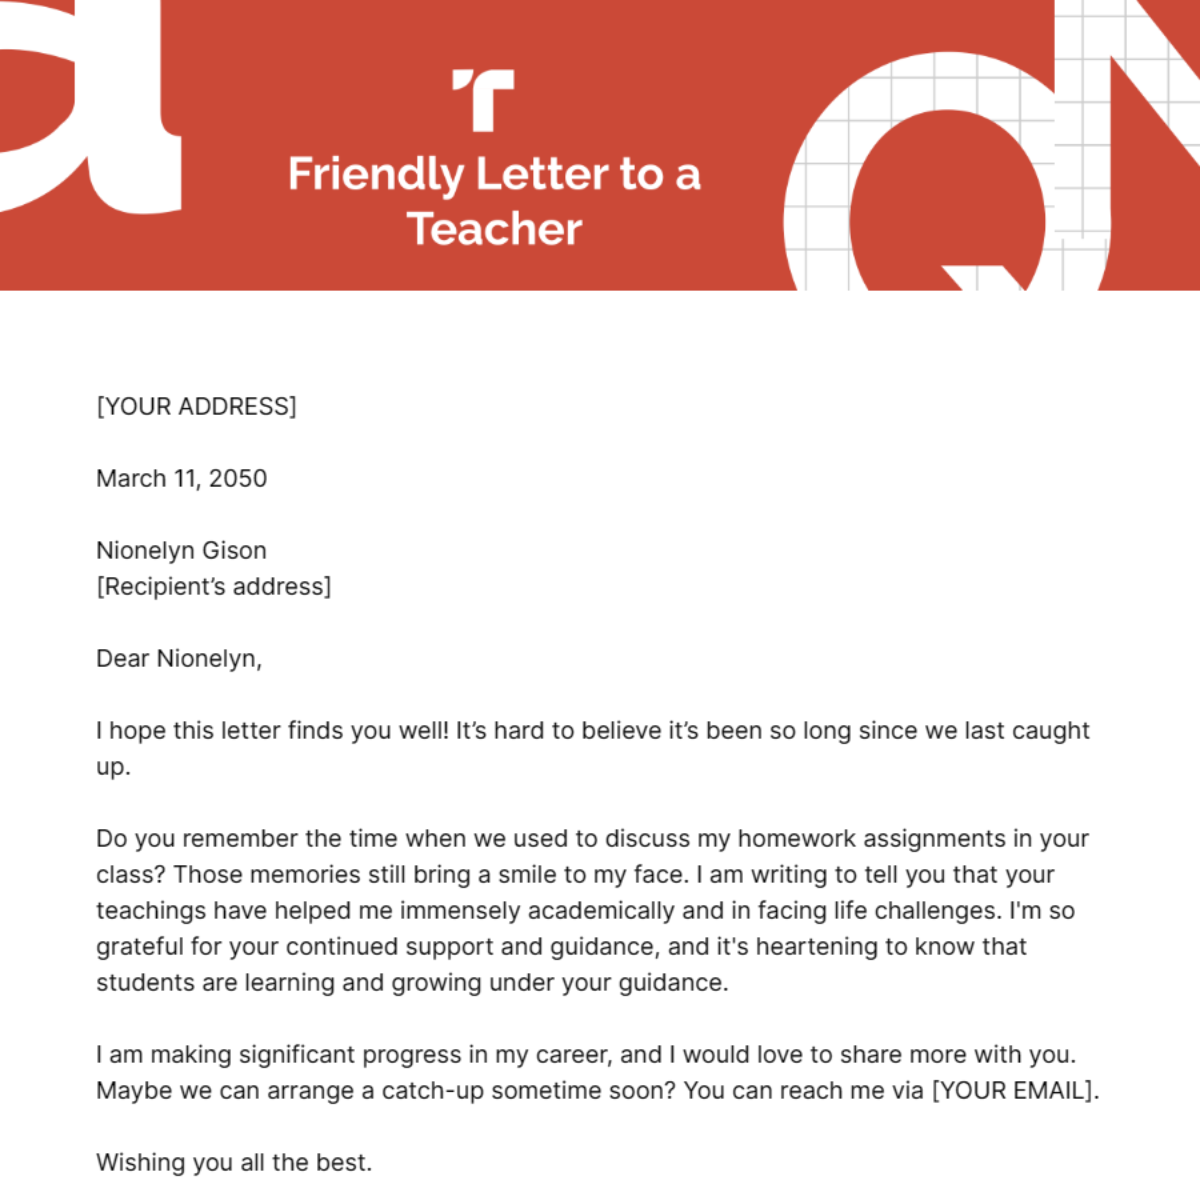 Friendly Letter to a Teacher Template